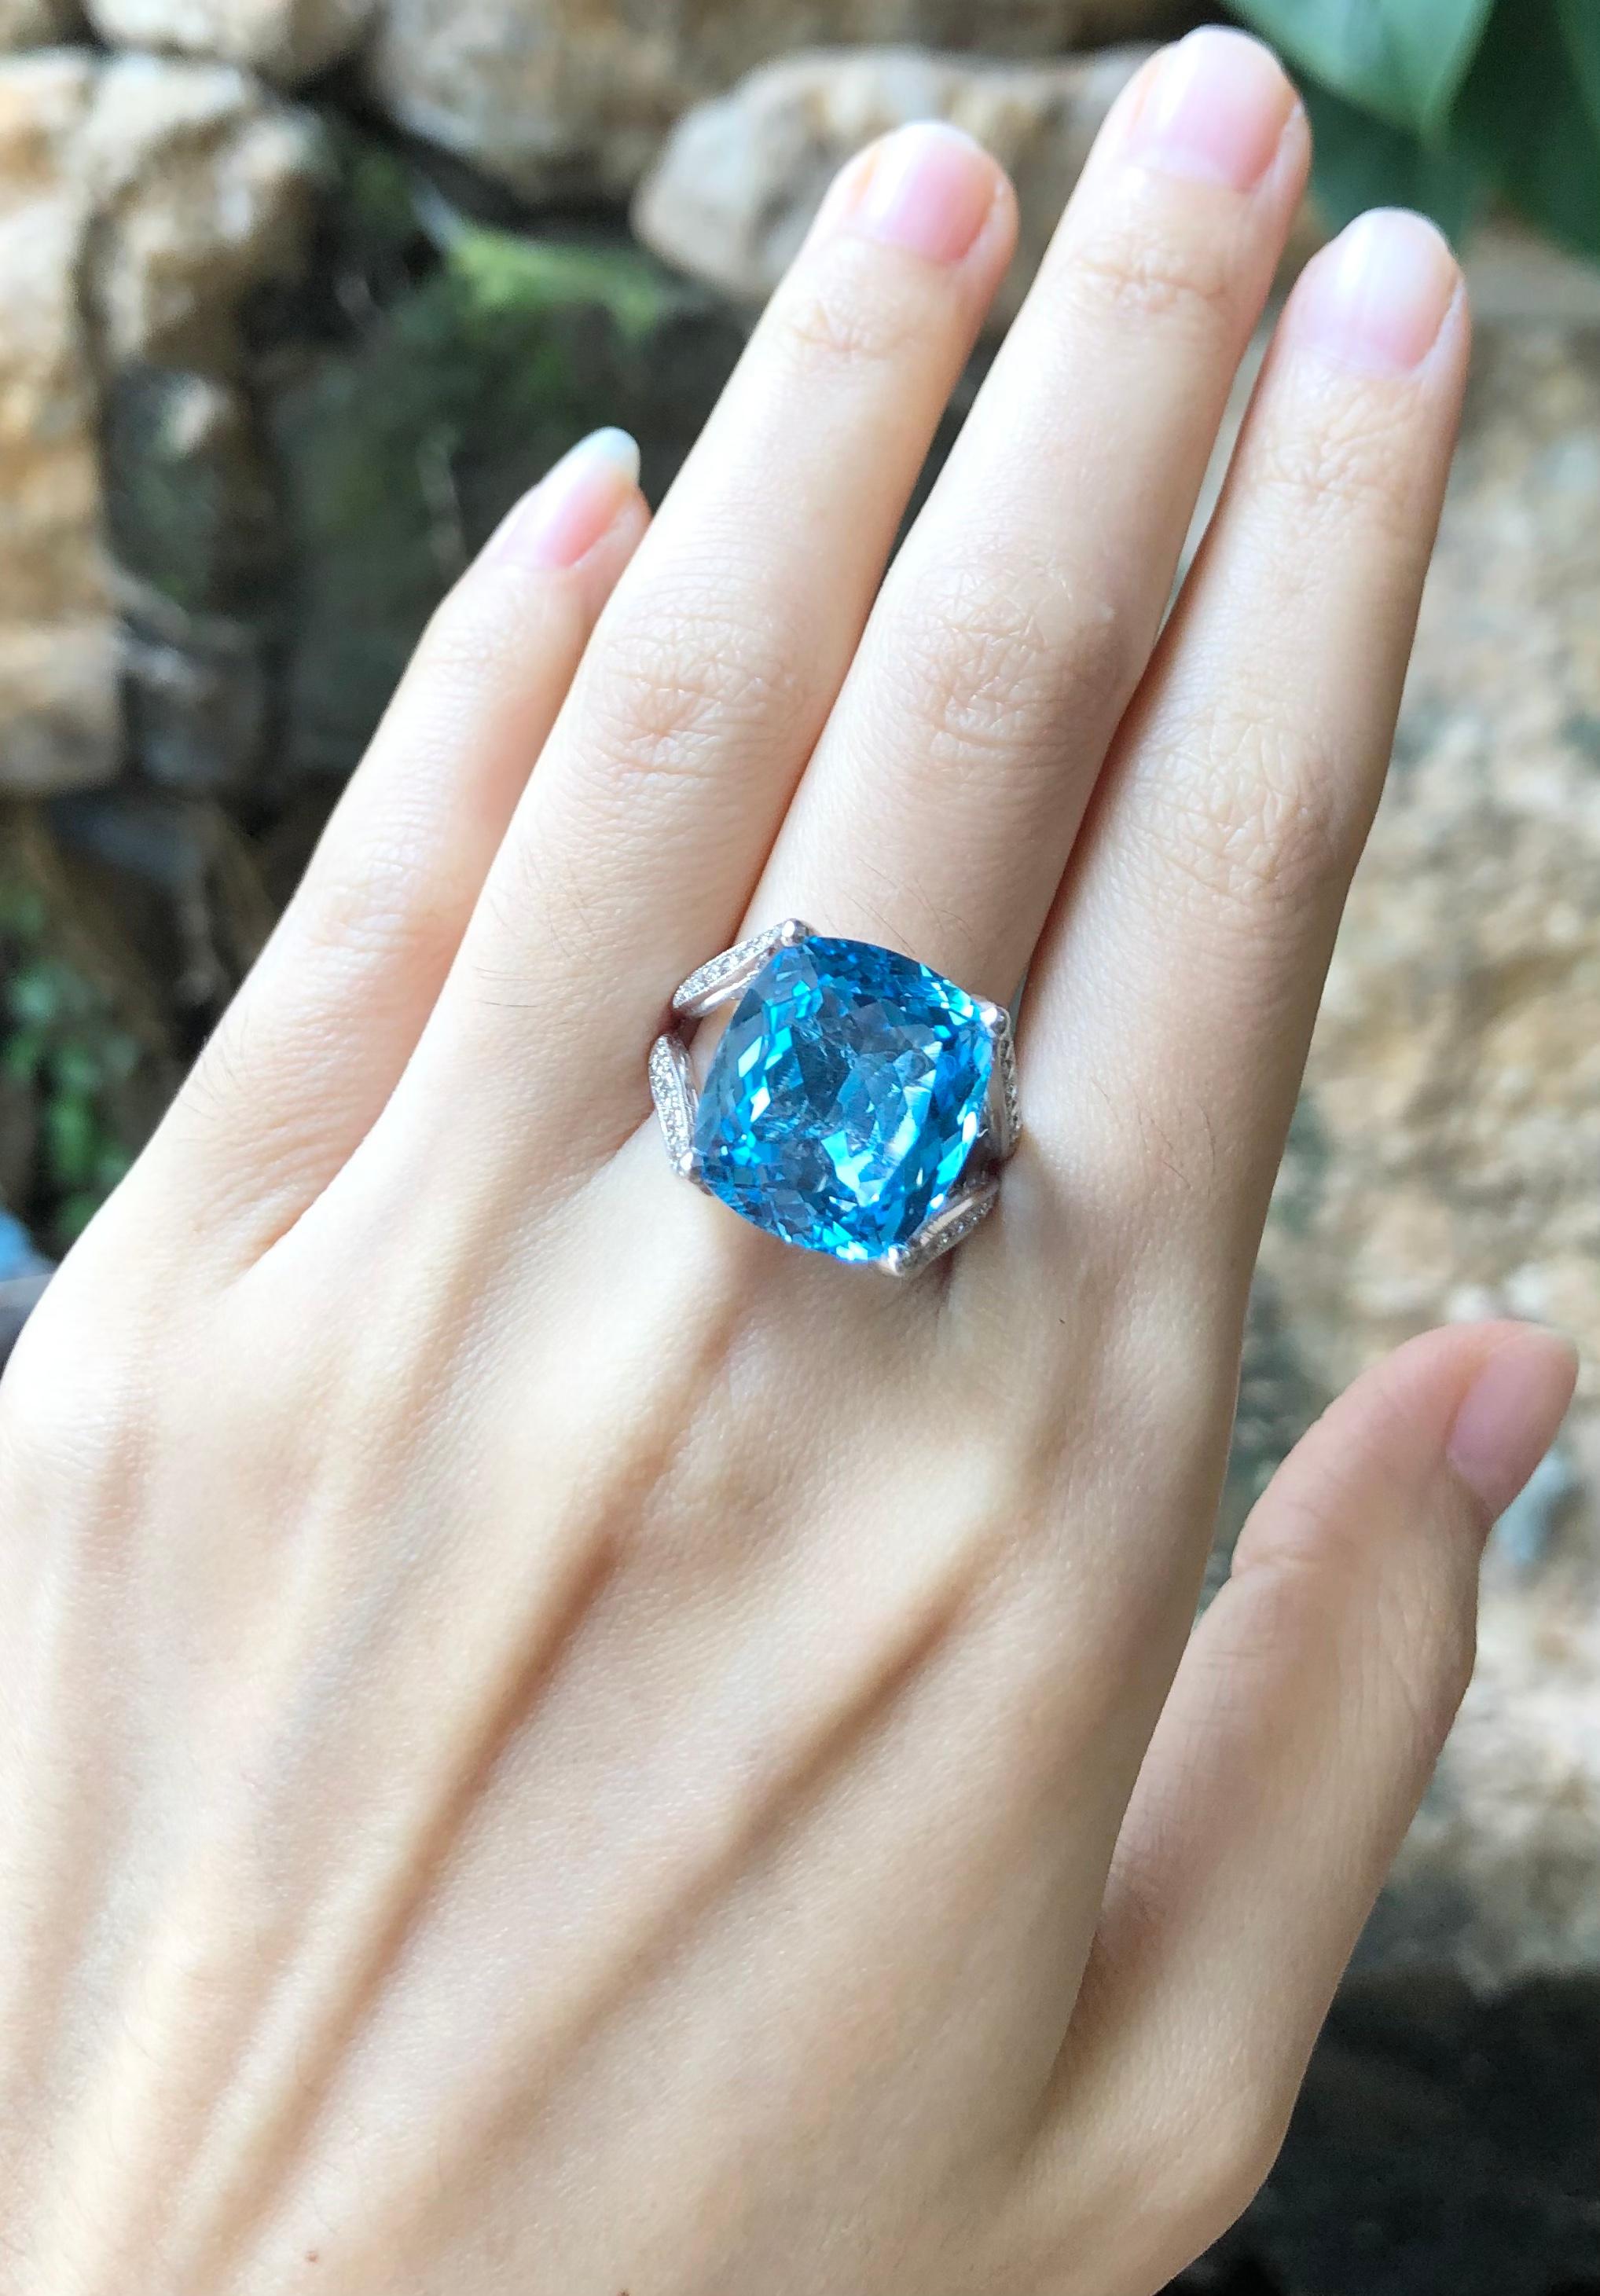 Blue Topaz 17.19 carats with Brown Diamond 0.58 carat Ring set in 18 Karat White Gold Settings

Width:  1.3 cm 
Length: 1.5 cm
Ring Size: 58
Total Weight: 13.78 grams

